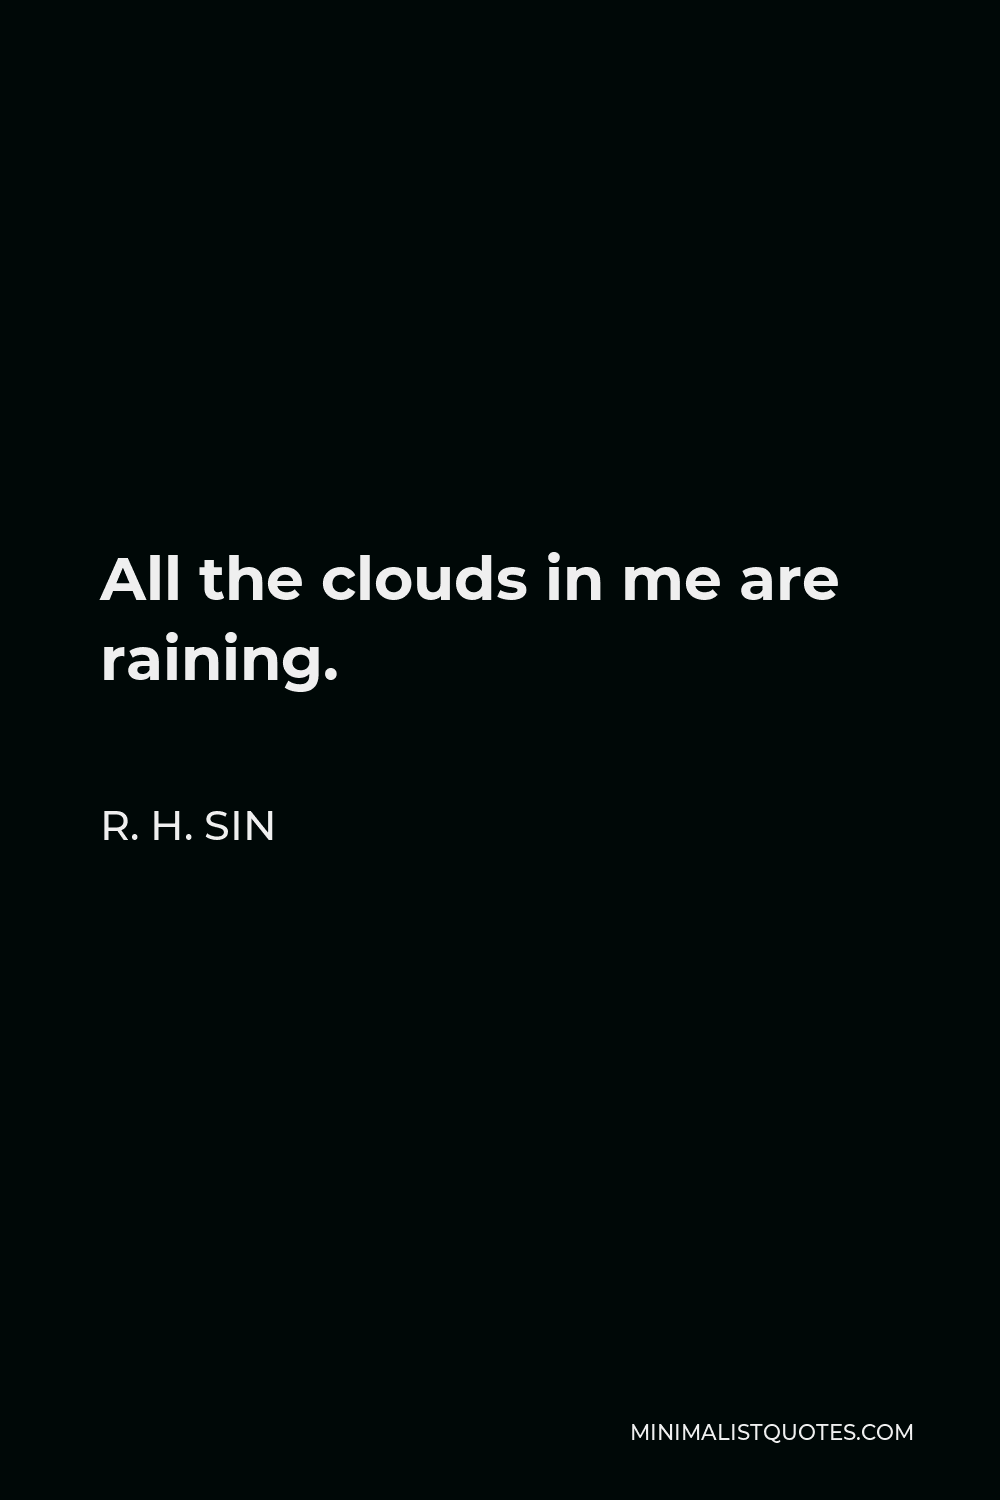 R. H. Sin Quote - All the clouds in me are raining.